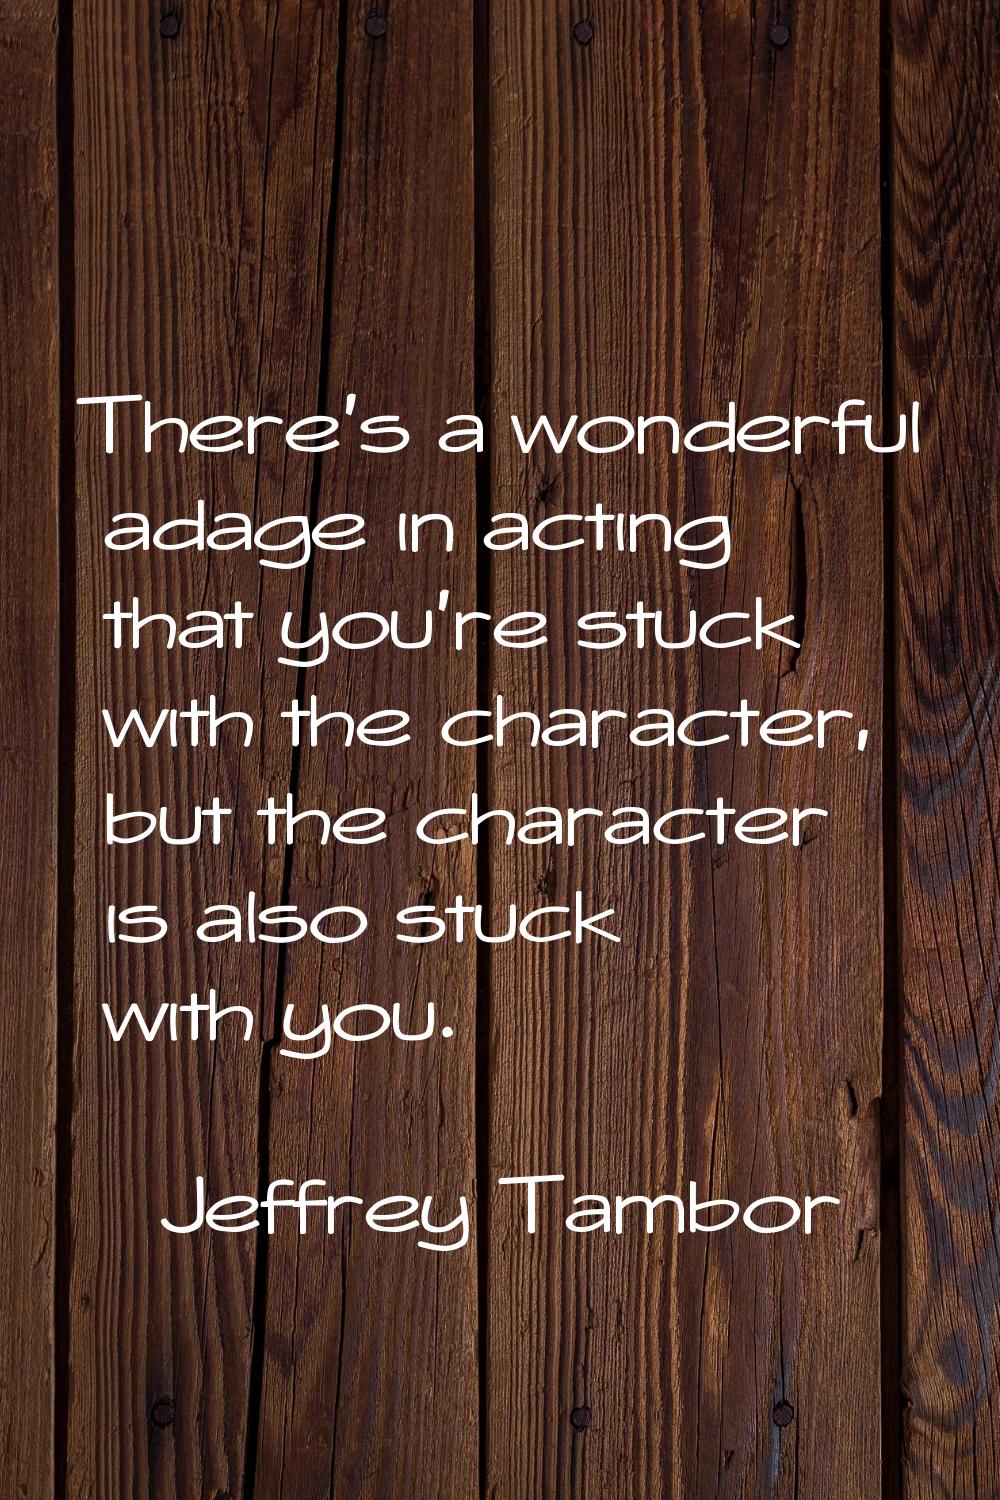 There's a wonderful adage in acting that you're stuck with the character, but the character is also